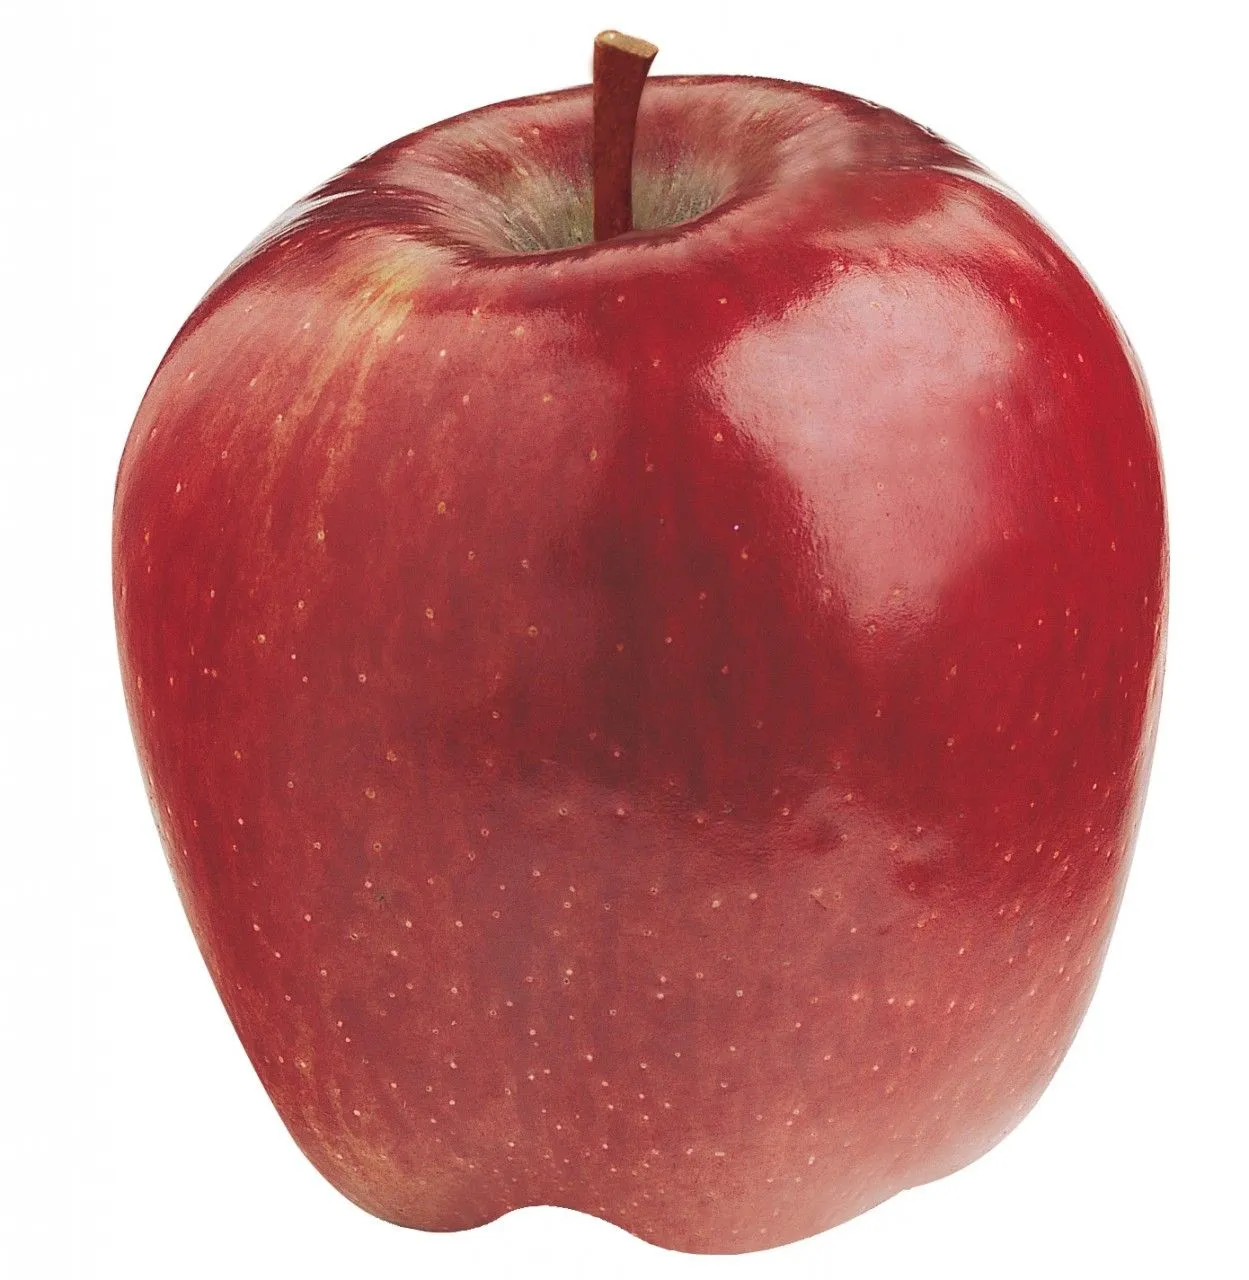  Red delicious